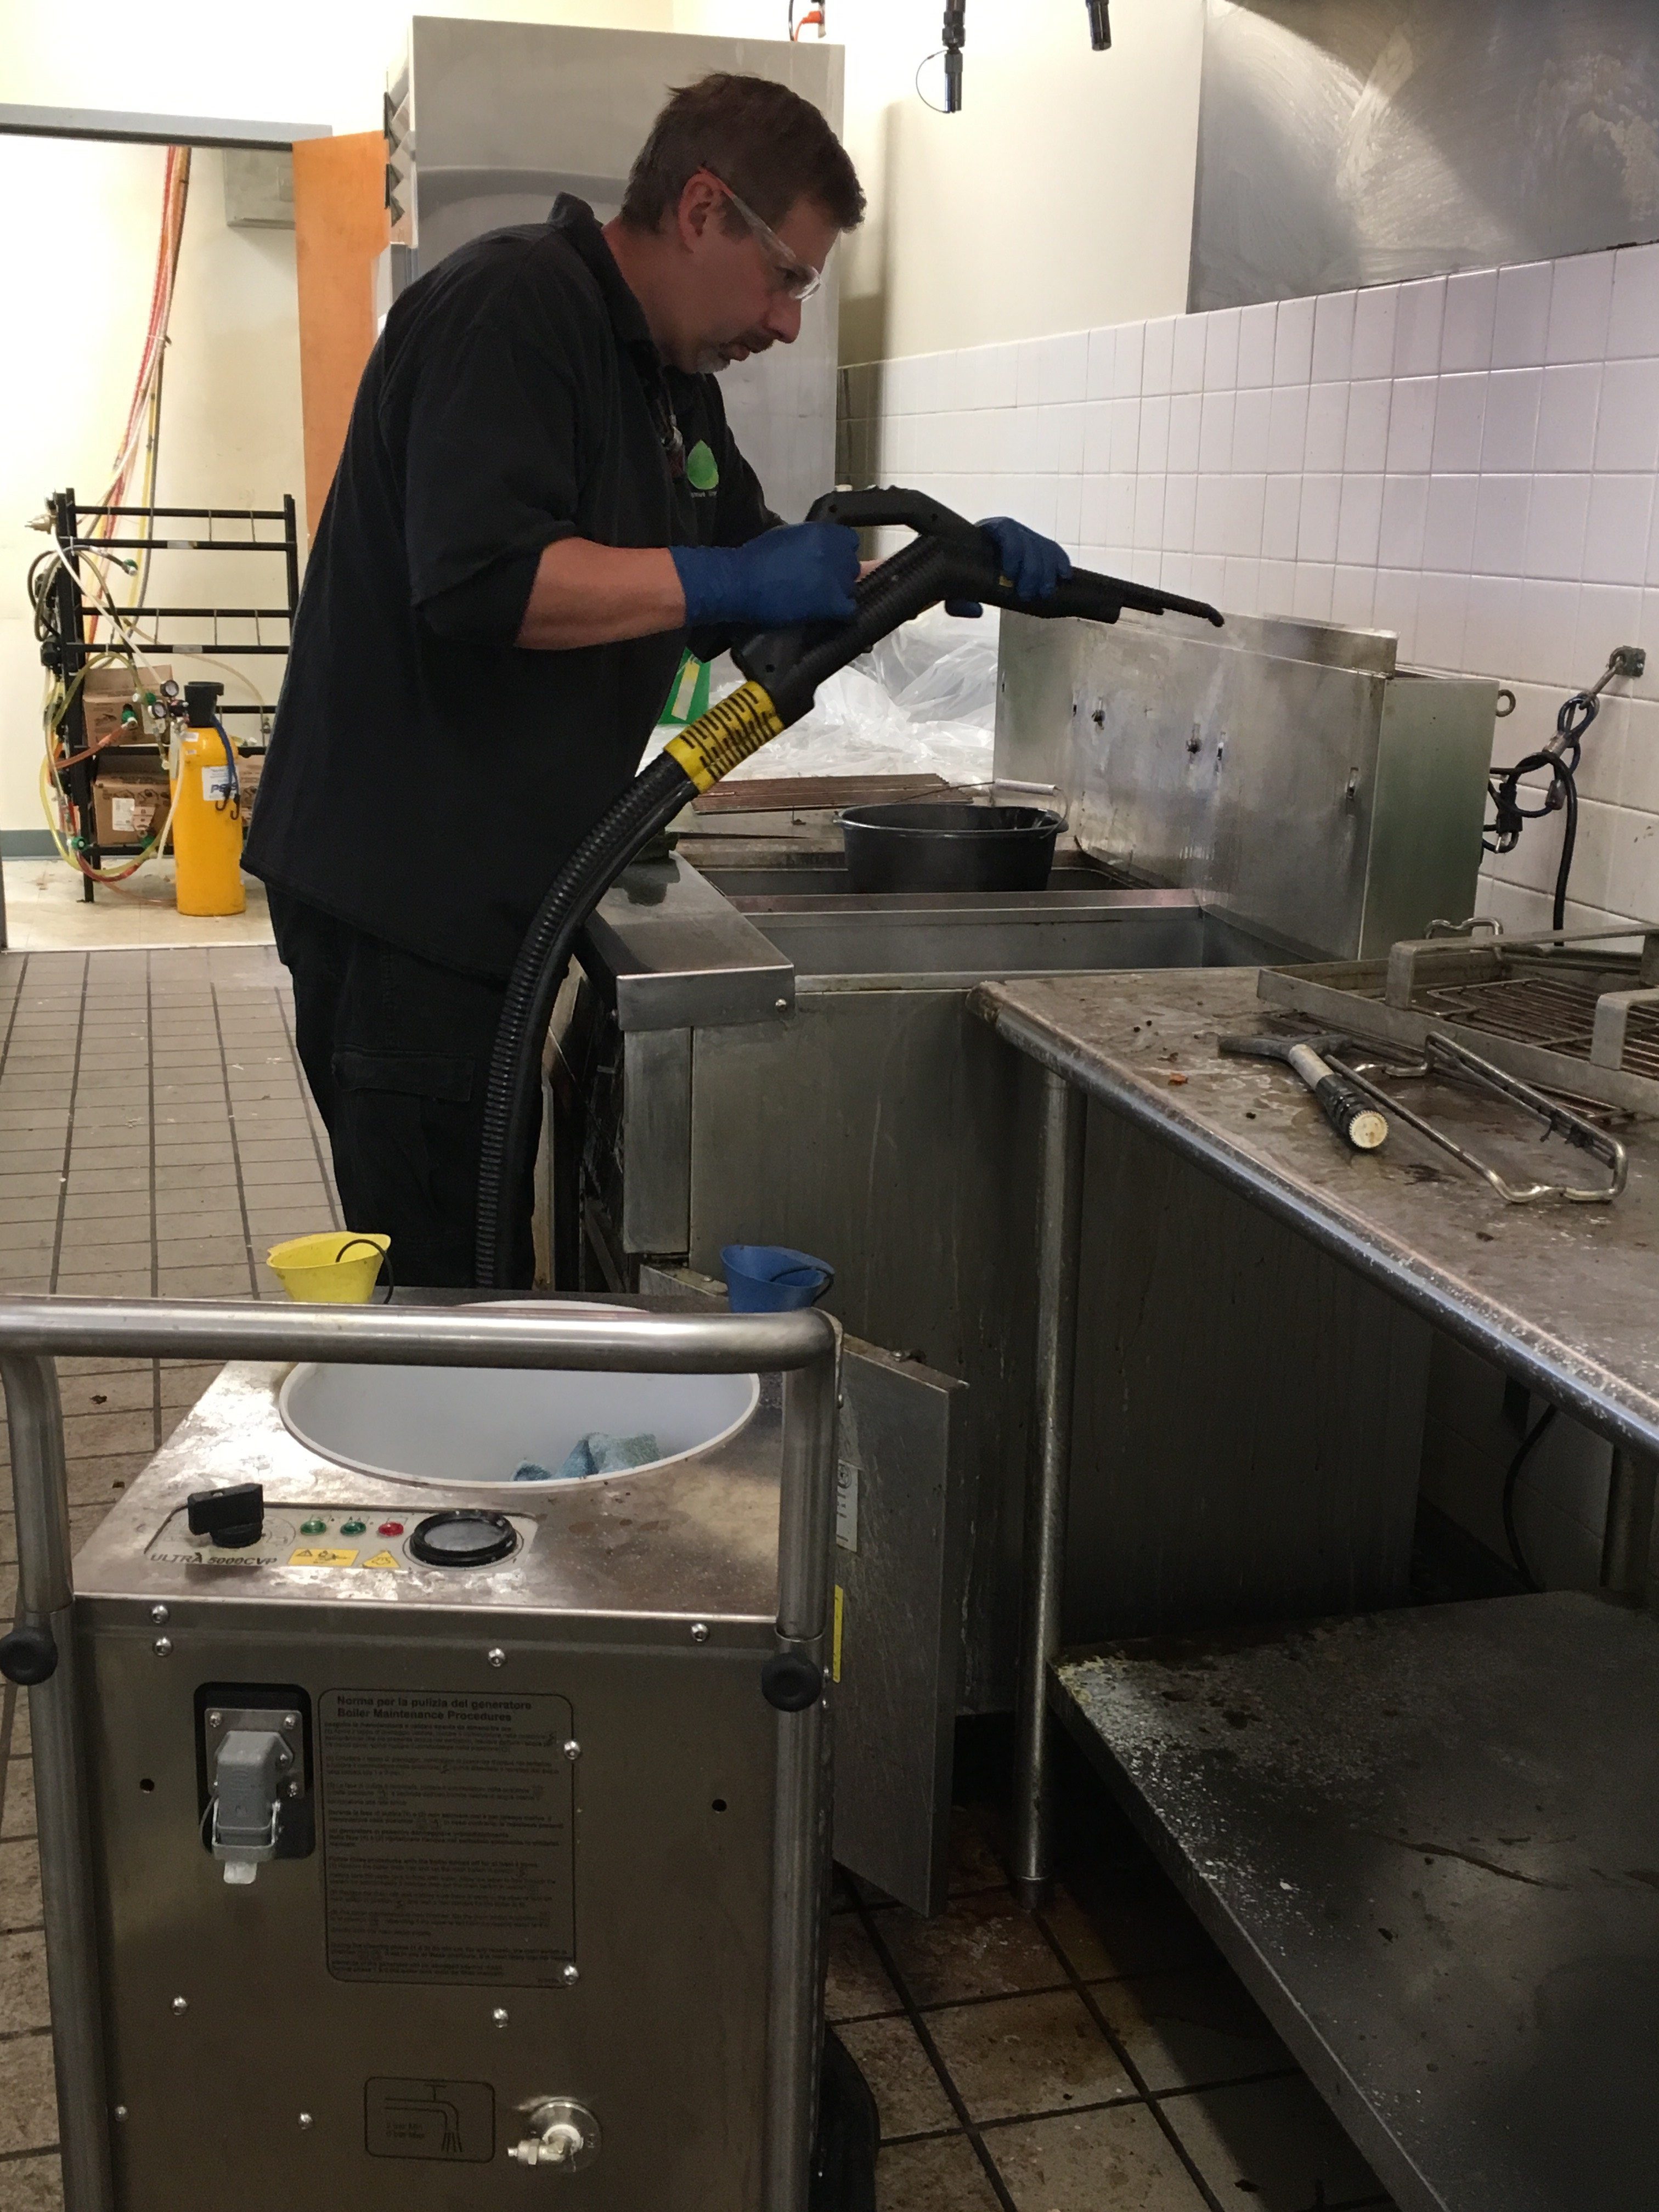 Cleaning Technique & Equipment Maintenance: Commercial Cleaning